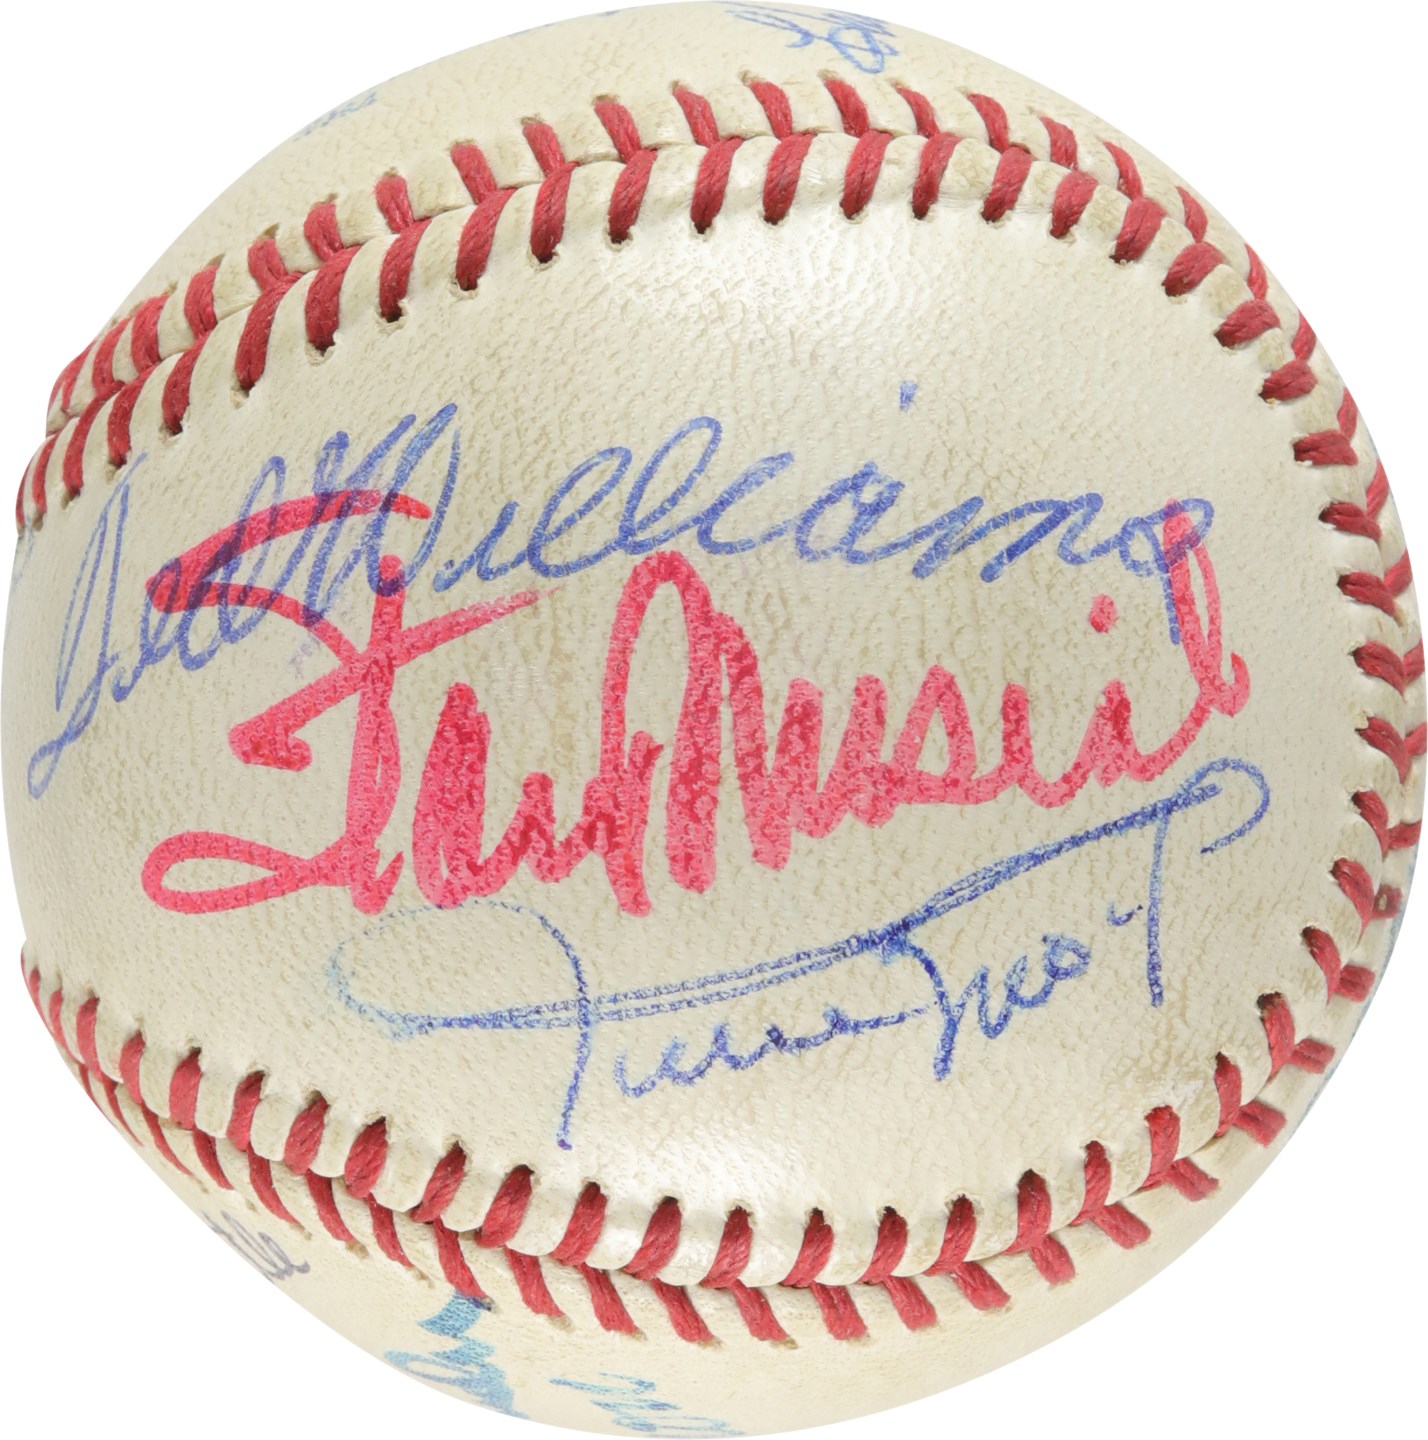 - Hall of Famers Signed Baseball w/500 HR & 3000 Hit Clubs (11)